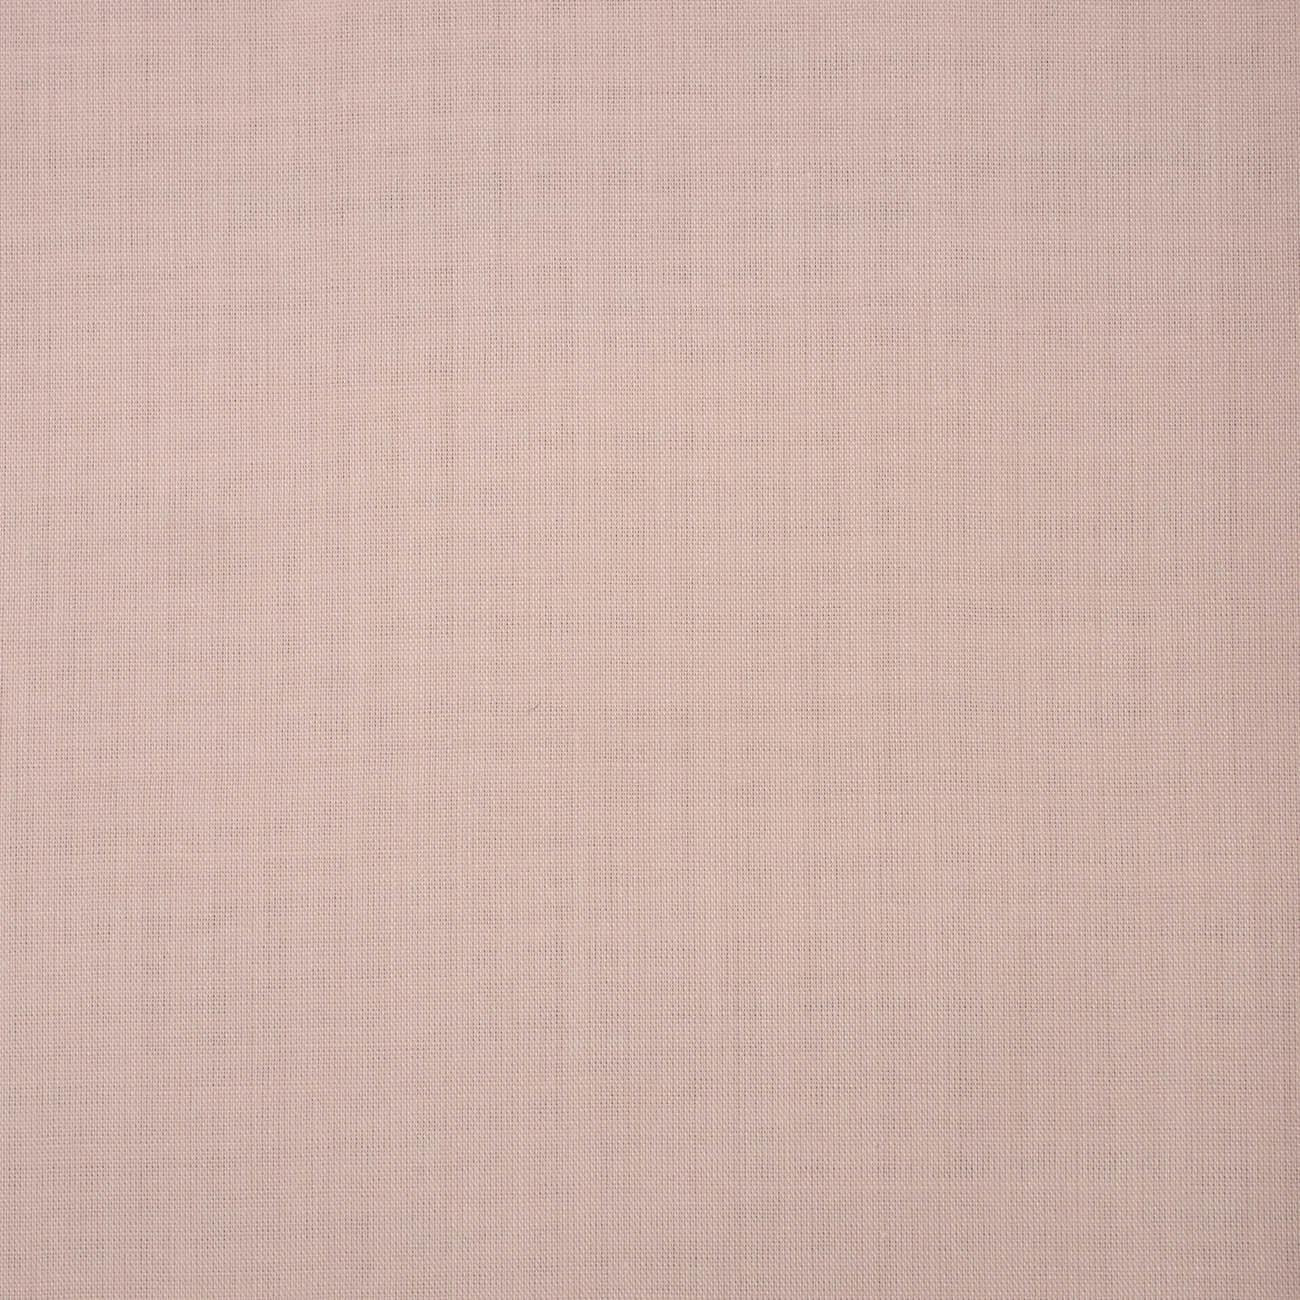 PALE PINK - Cotton woven fabric